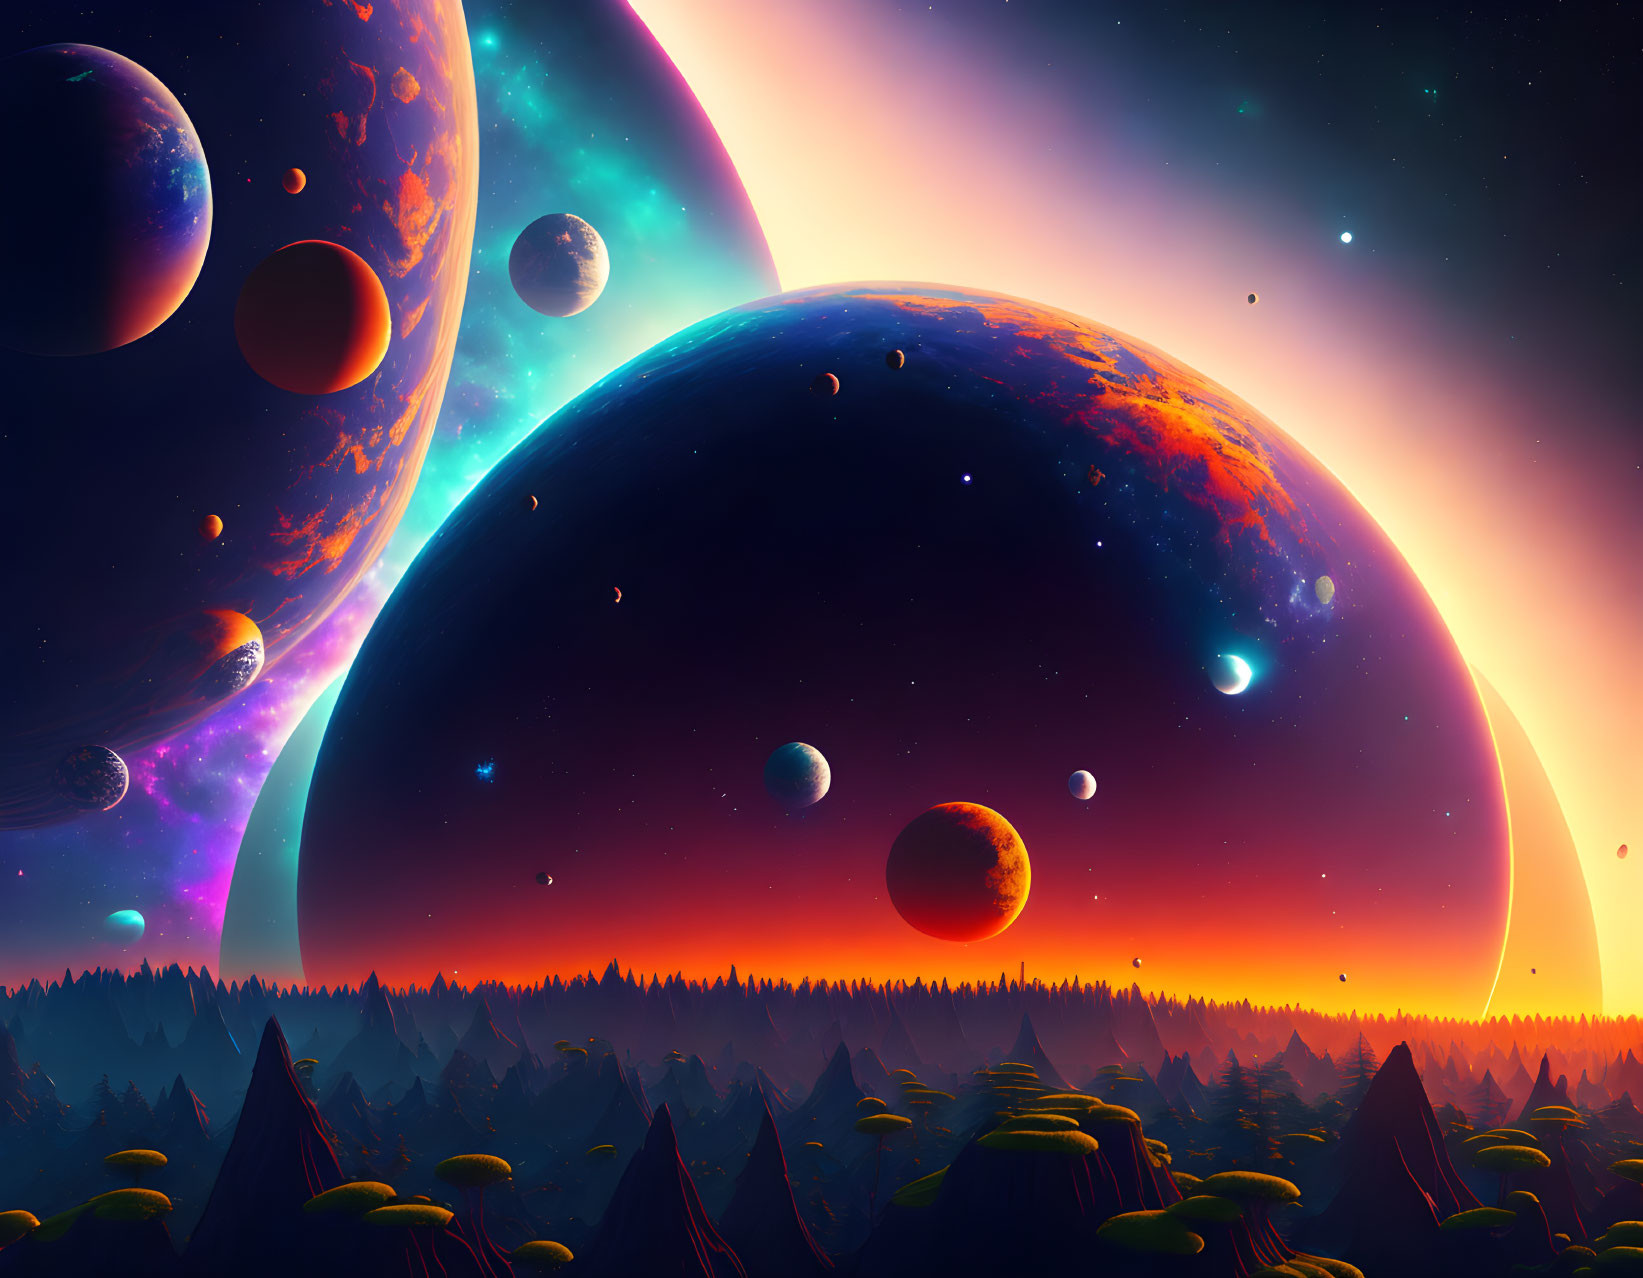 Multiple planets and moons in a starlit cosmic landscape with forest silhouette